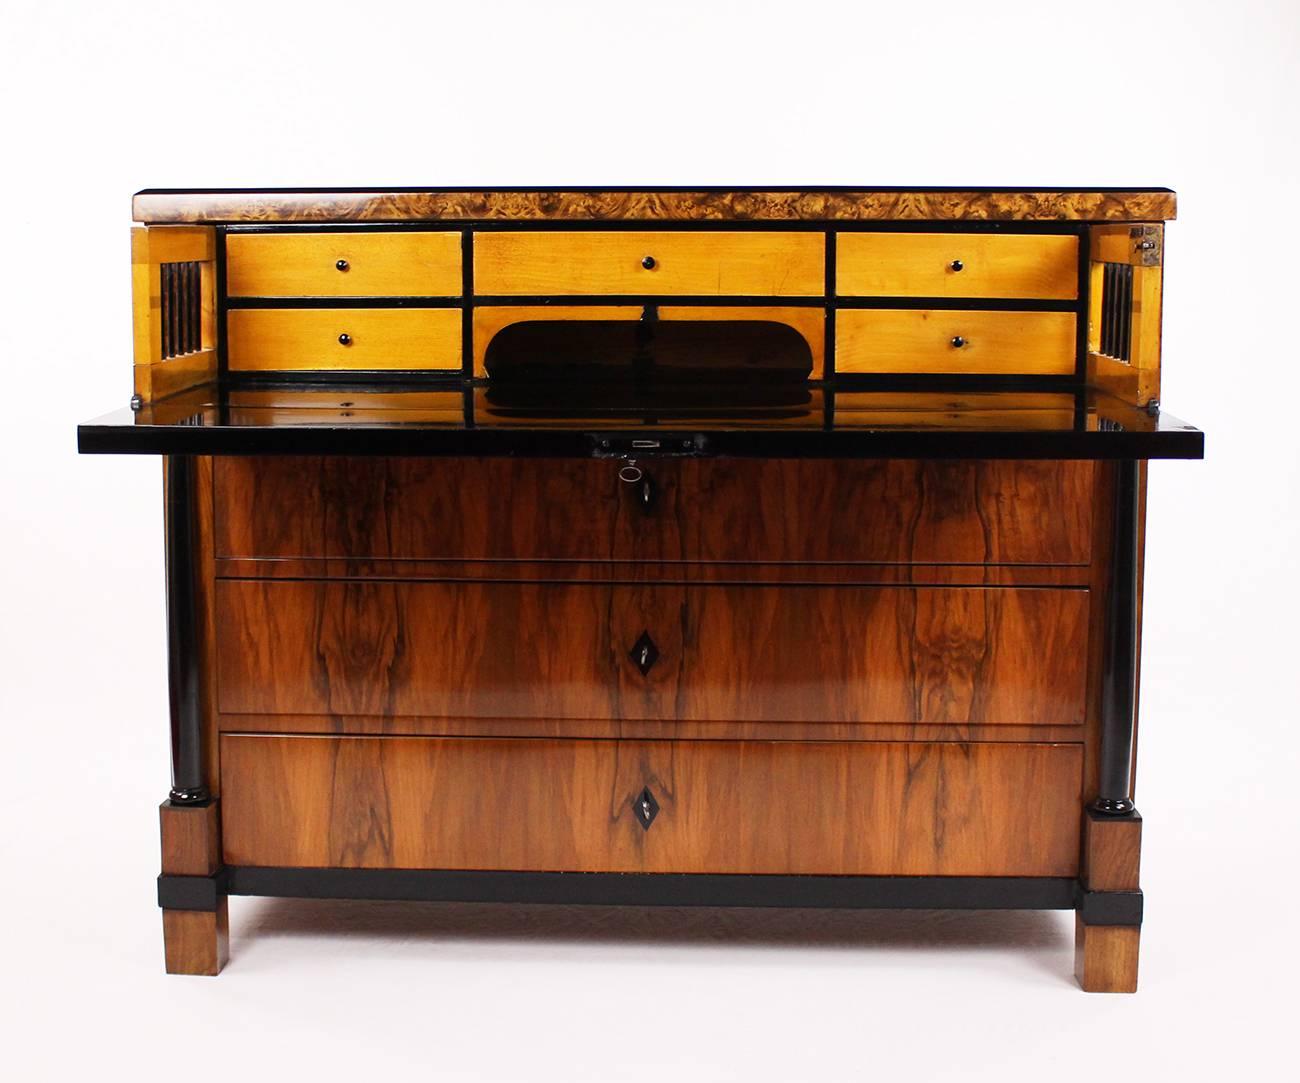 • 19th century Biedermeier period-writing chest of drawers, circa 1830-1840
• Walnut-tree and nut root wood veneered
• Partly ebonized
• Four large pushes, the upper push as a writing surface extendable
• Nice reflected veneer
• Restored